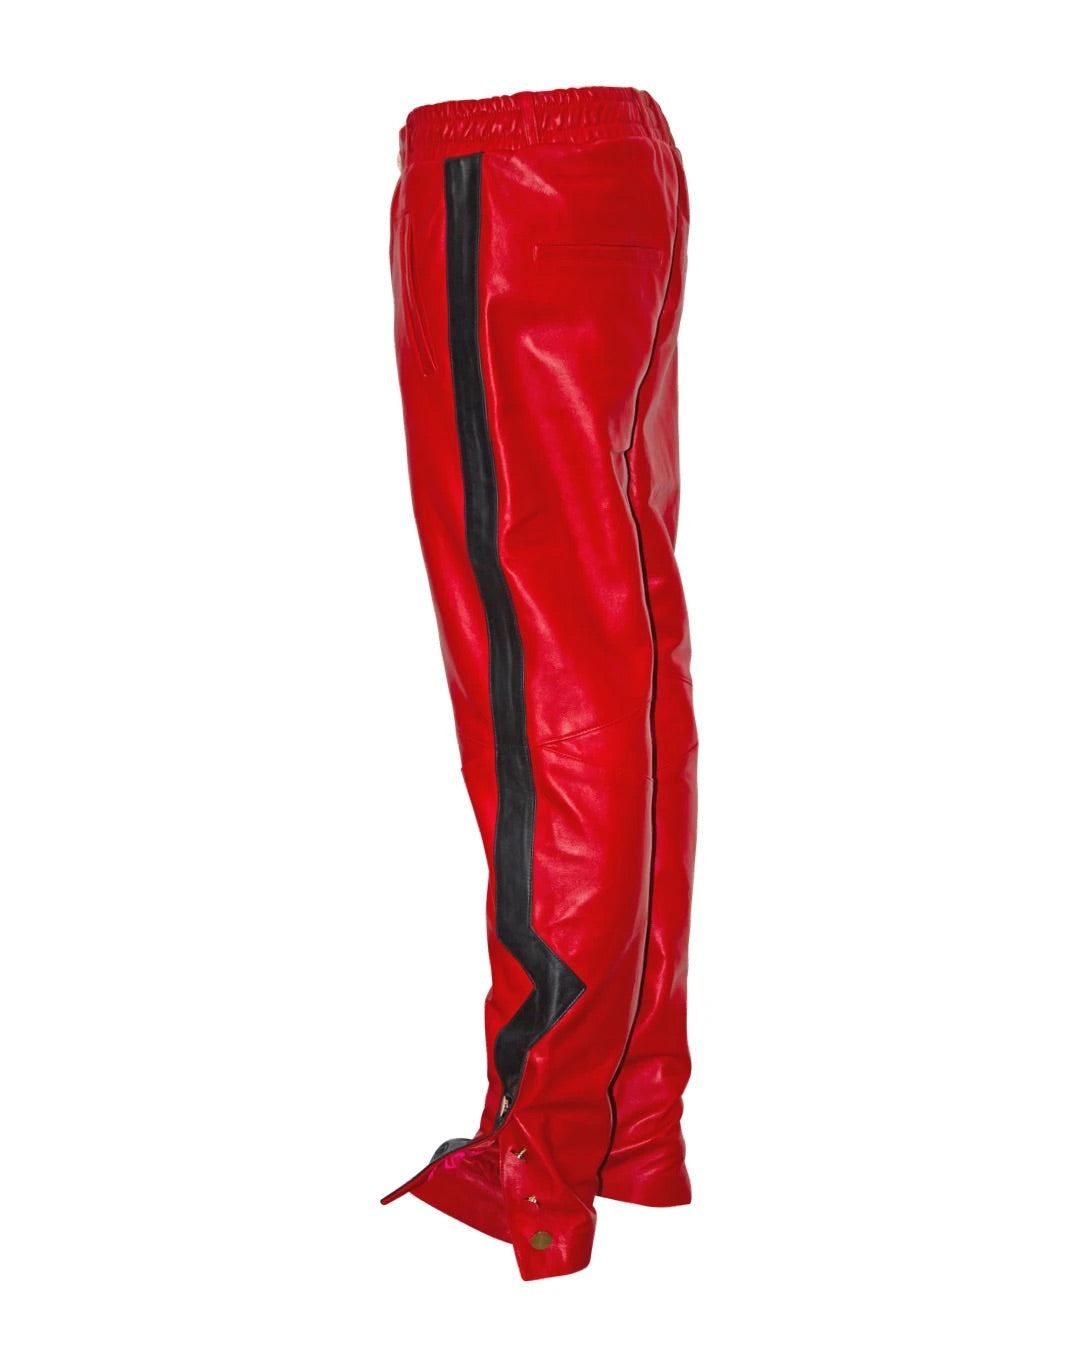 Leather Valley Track Suit (Red/Black)